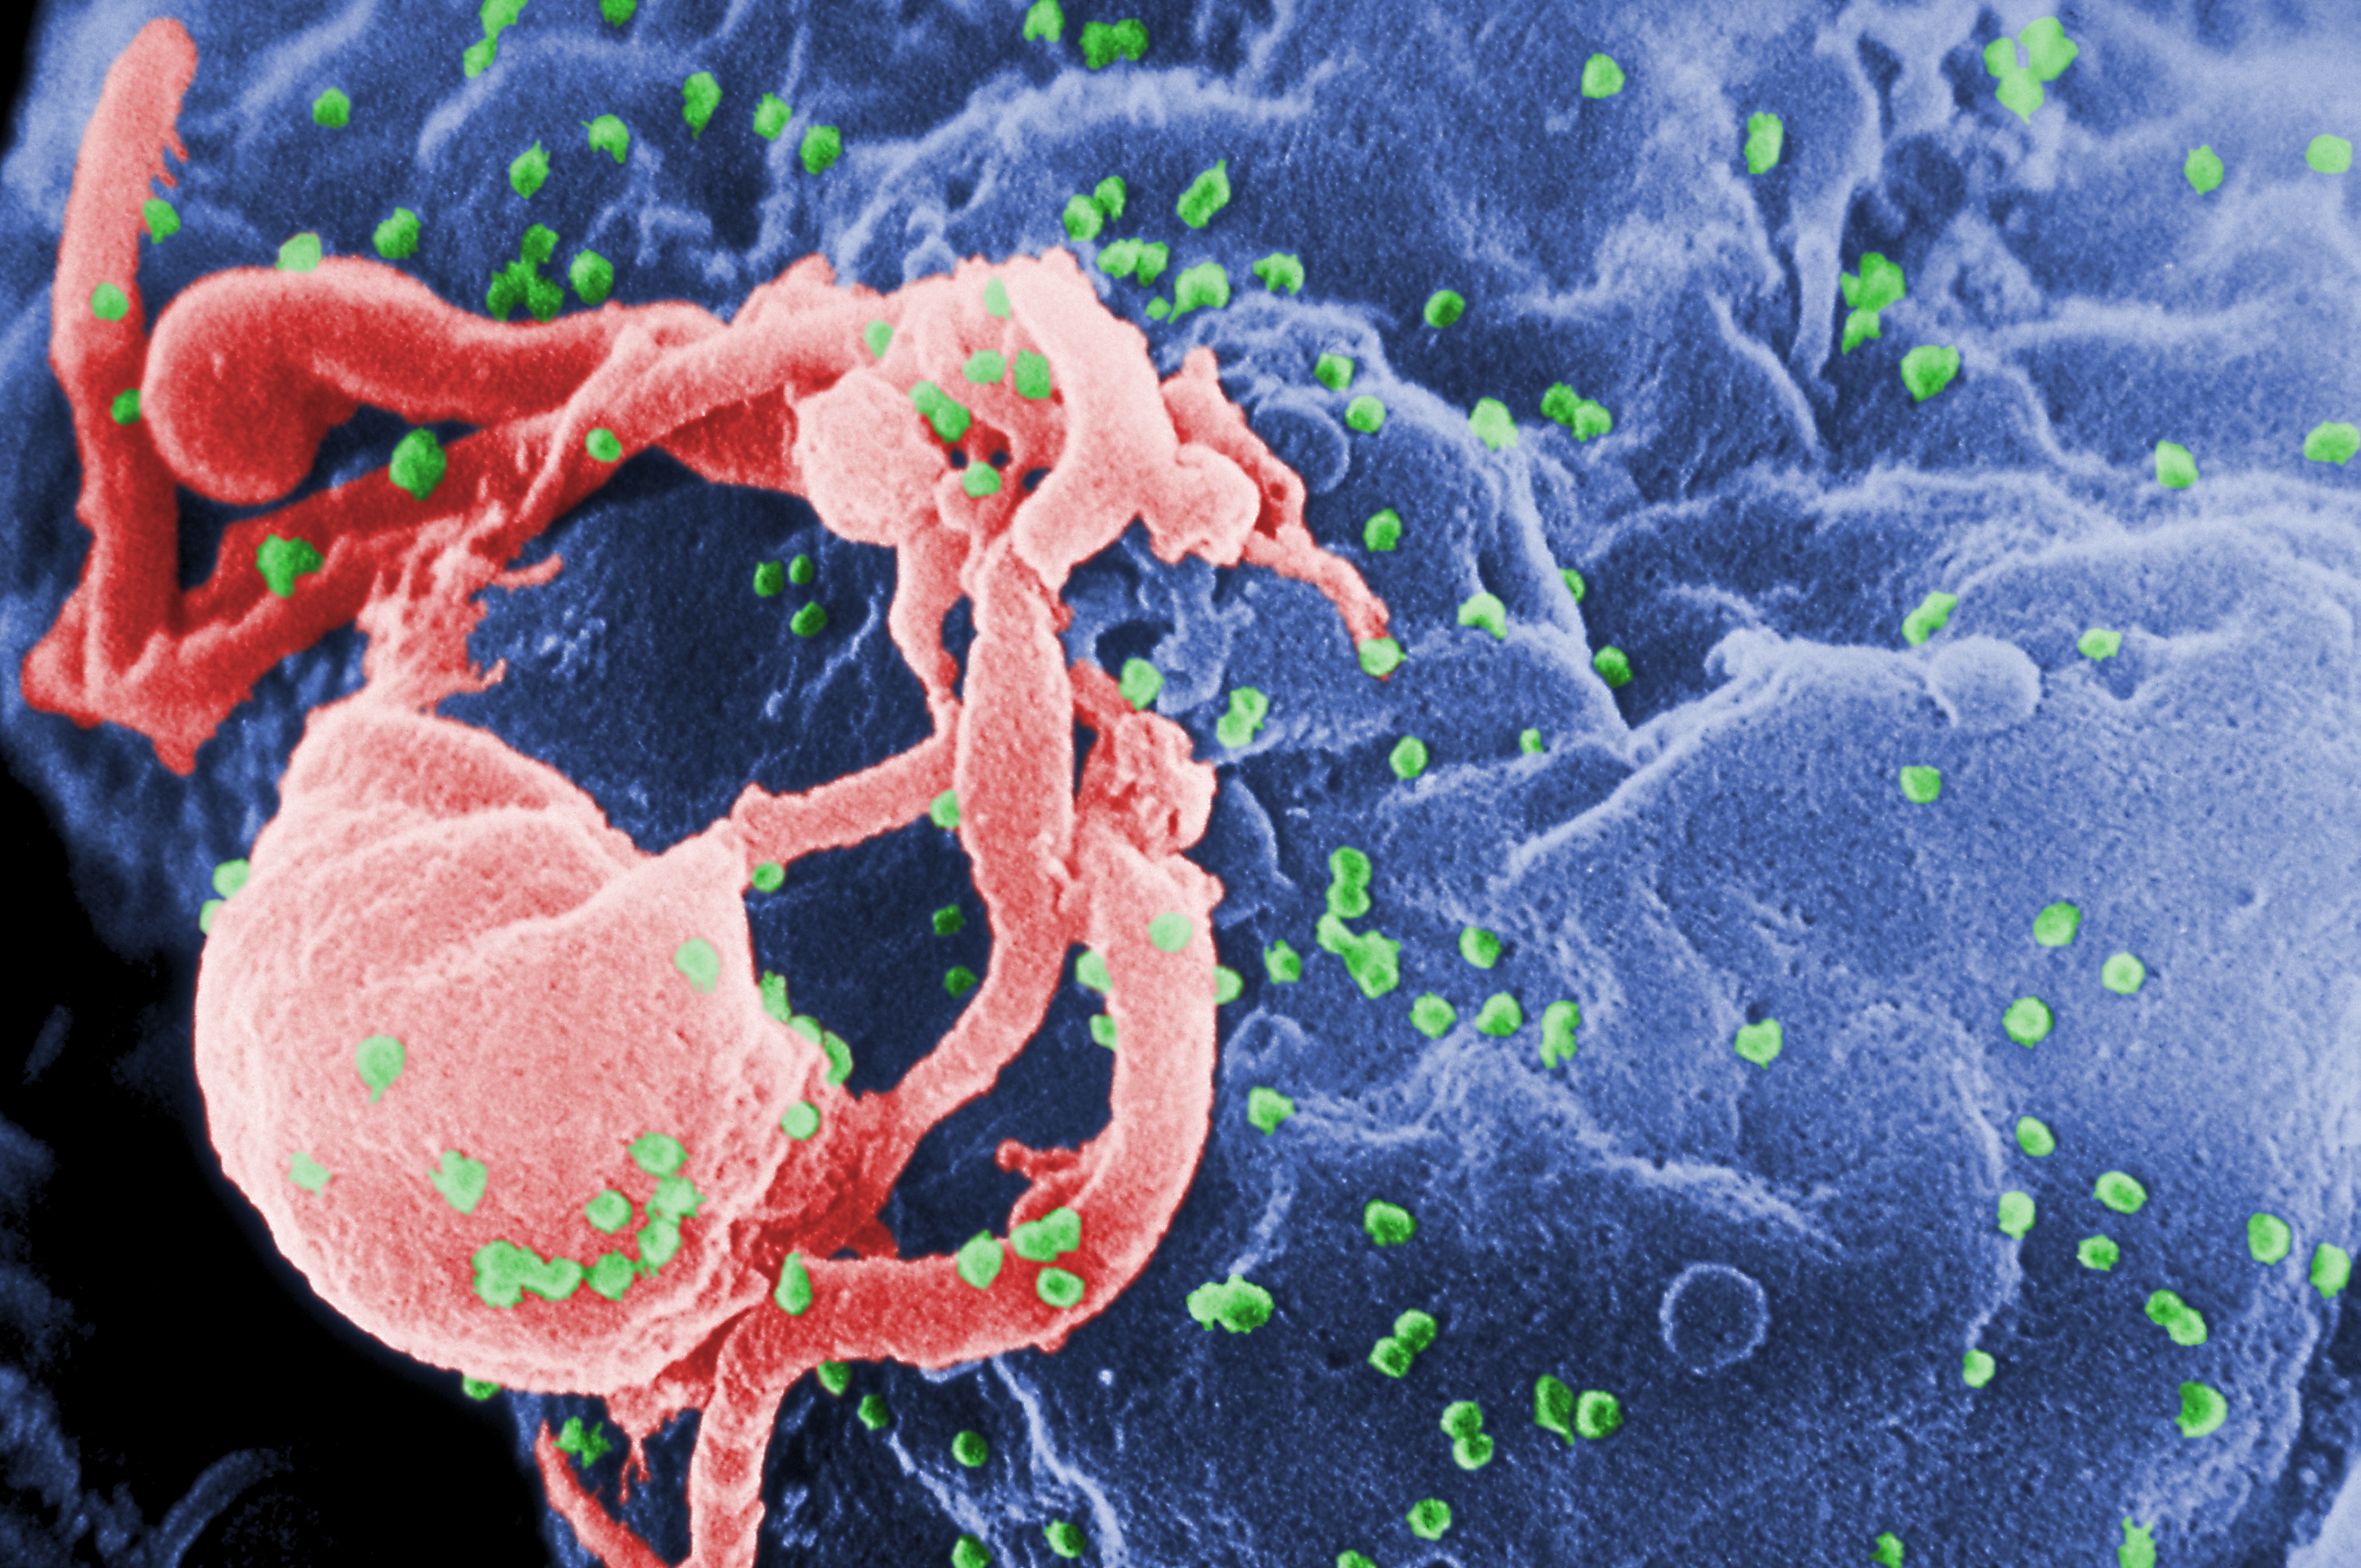 Scanning electron micrograph of HIV virions budding from a white blood cell.